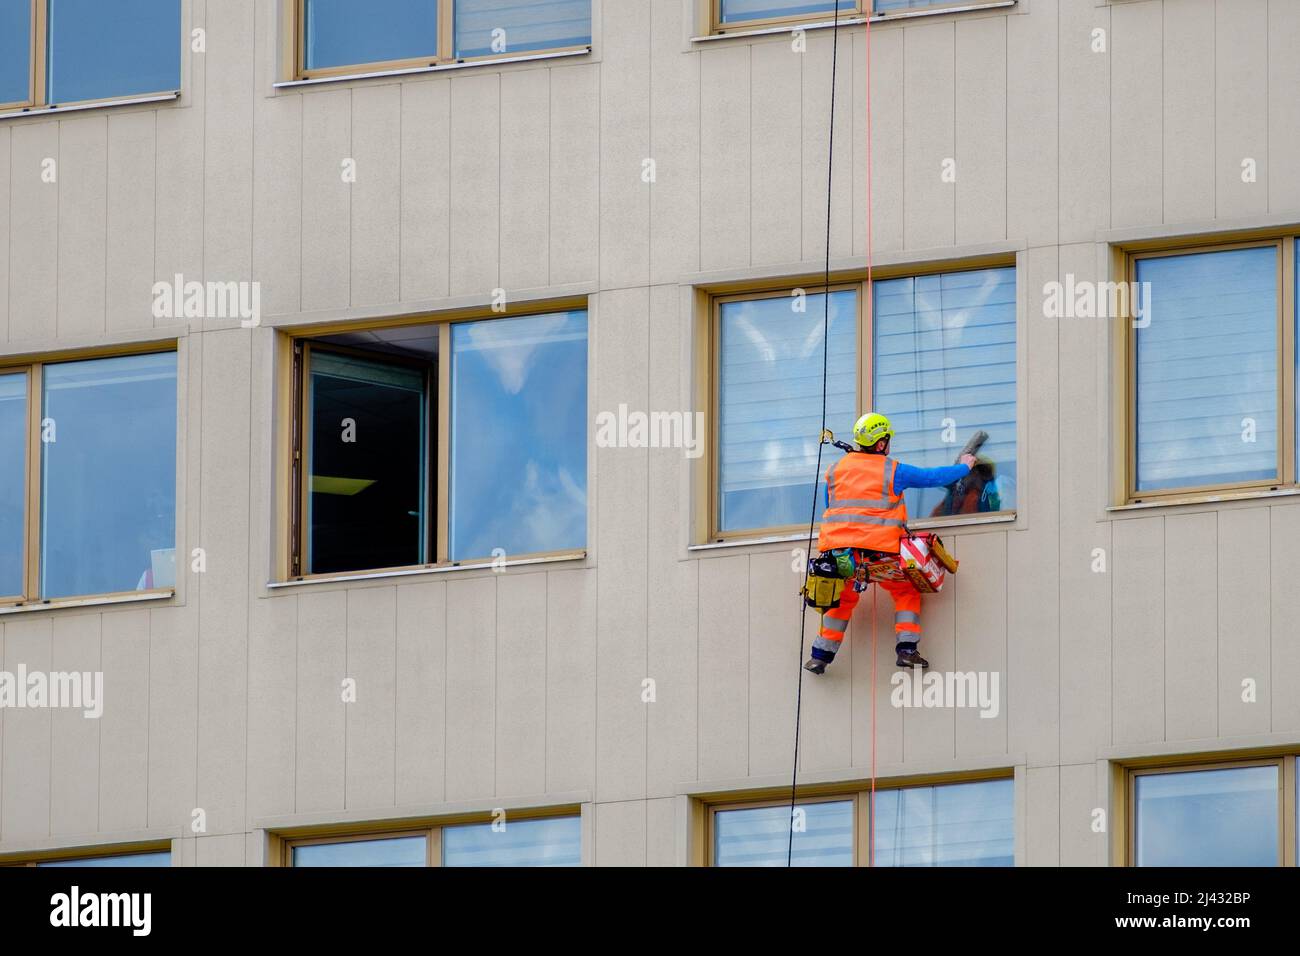 Minsk, Belarus - April 11, 2022: Industrial climber washes windows on the facade of a building in the business district Stock Photo